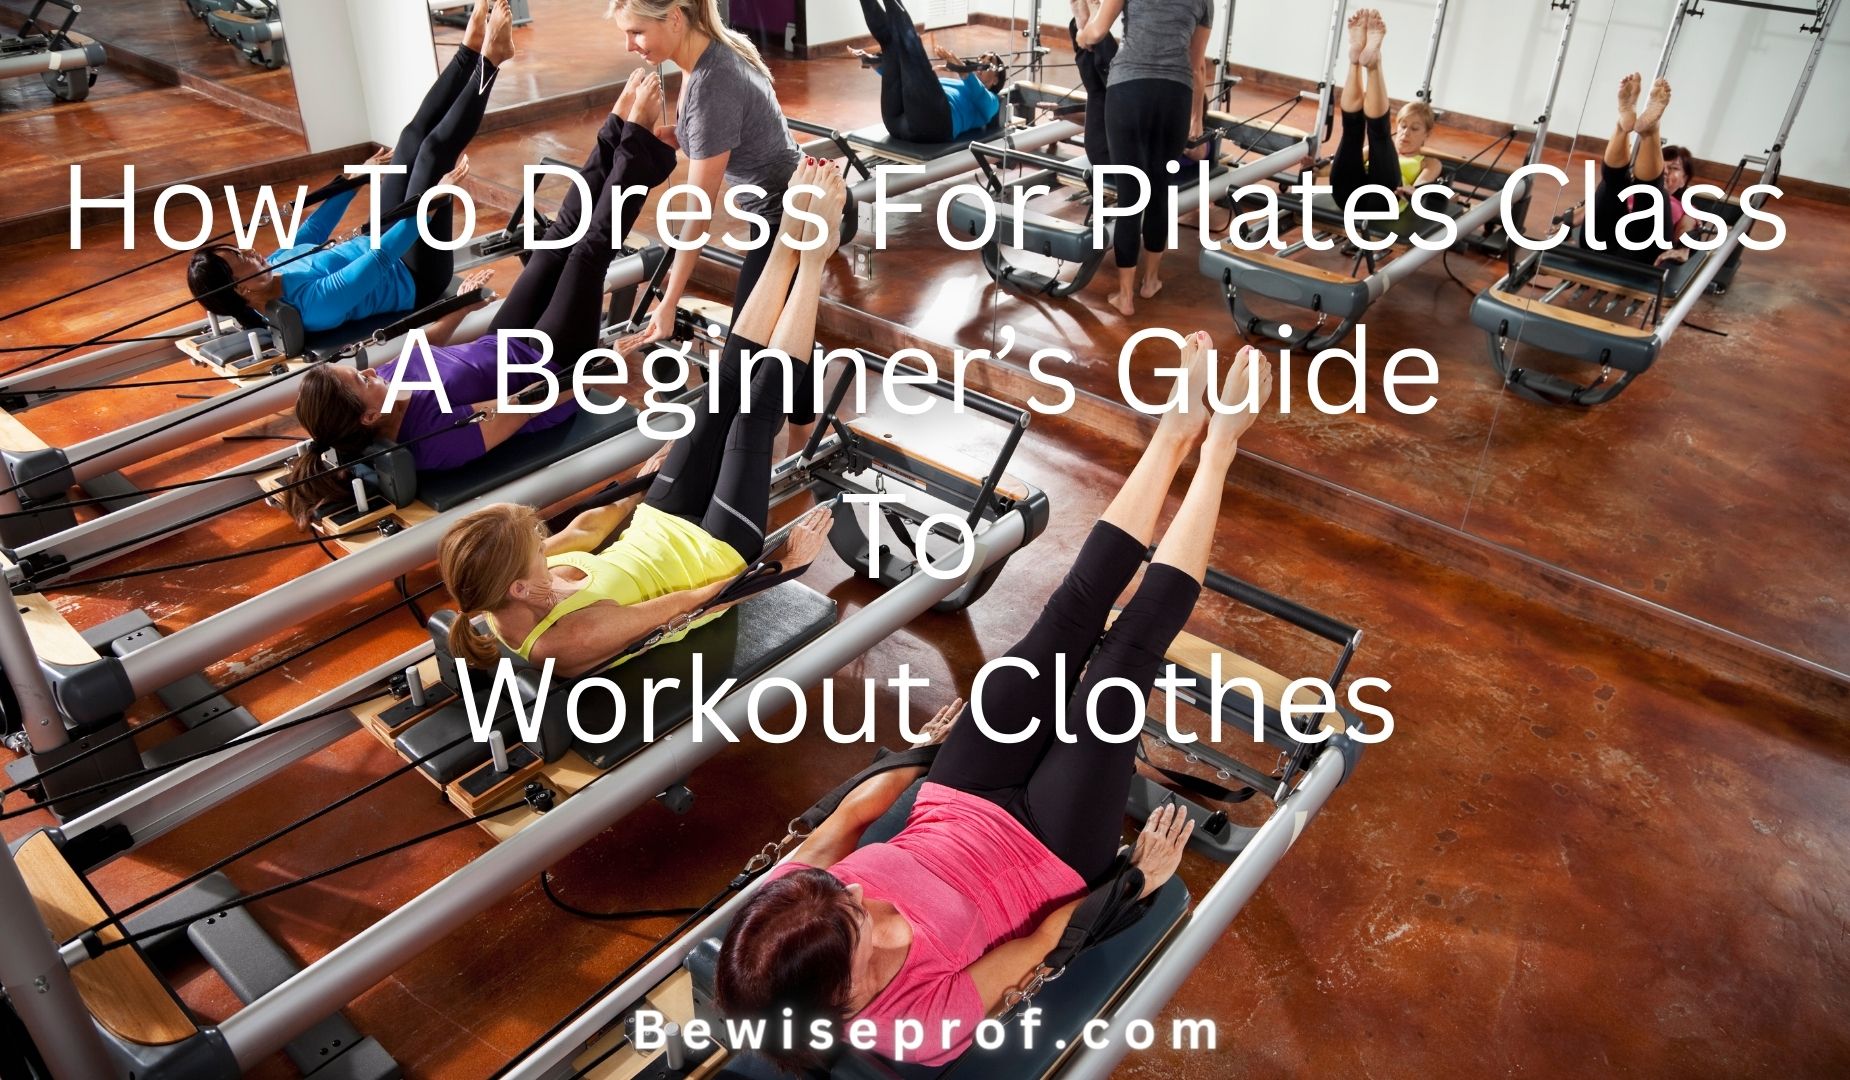 How To Dress For Pilates Class: A Beginner’s Guide To Workout Clothes